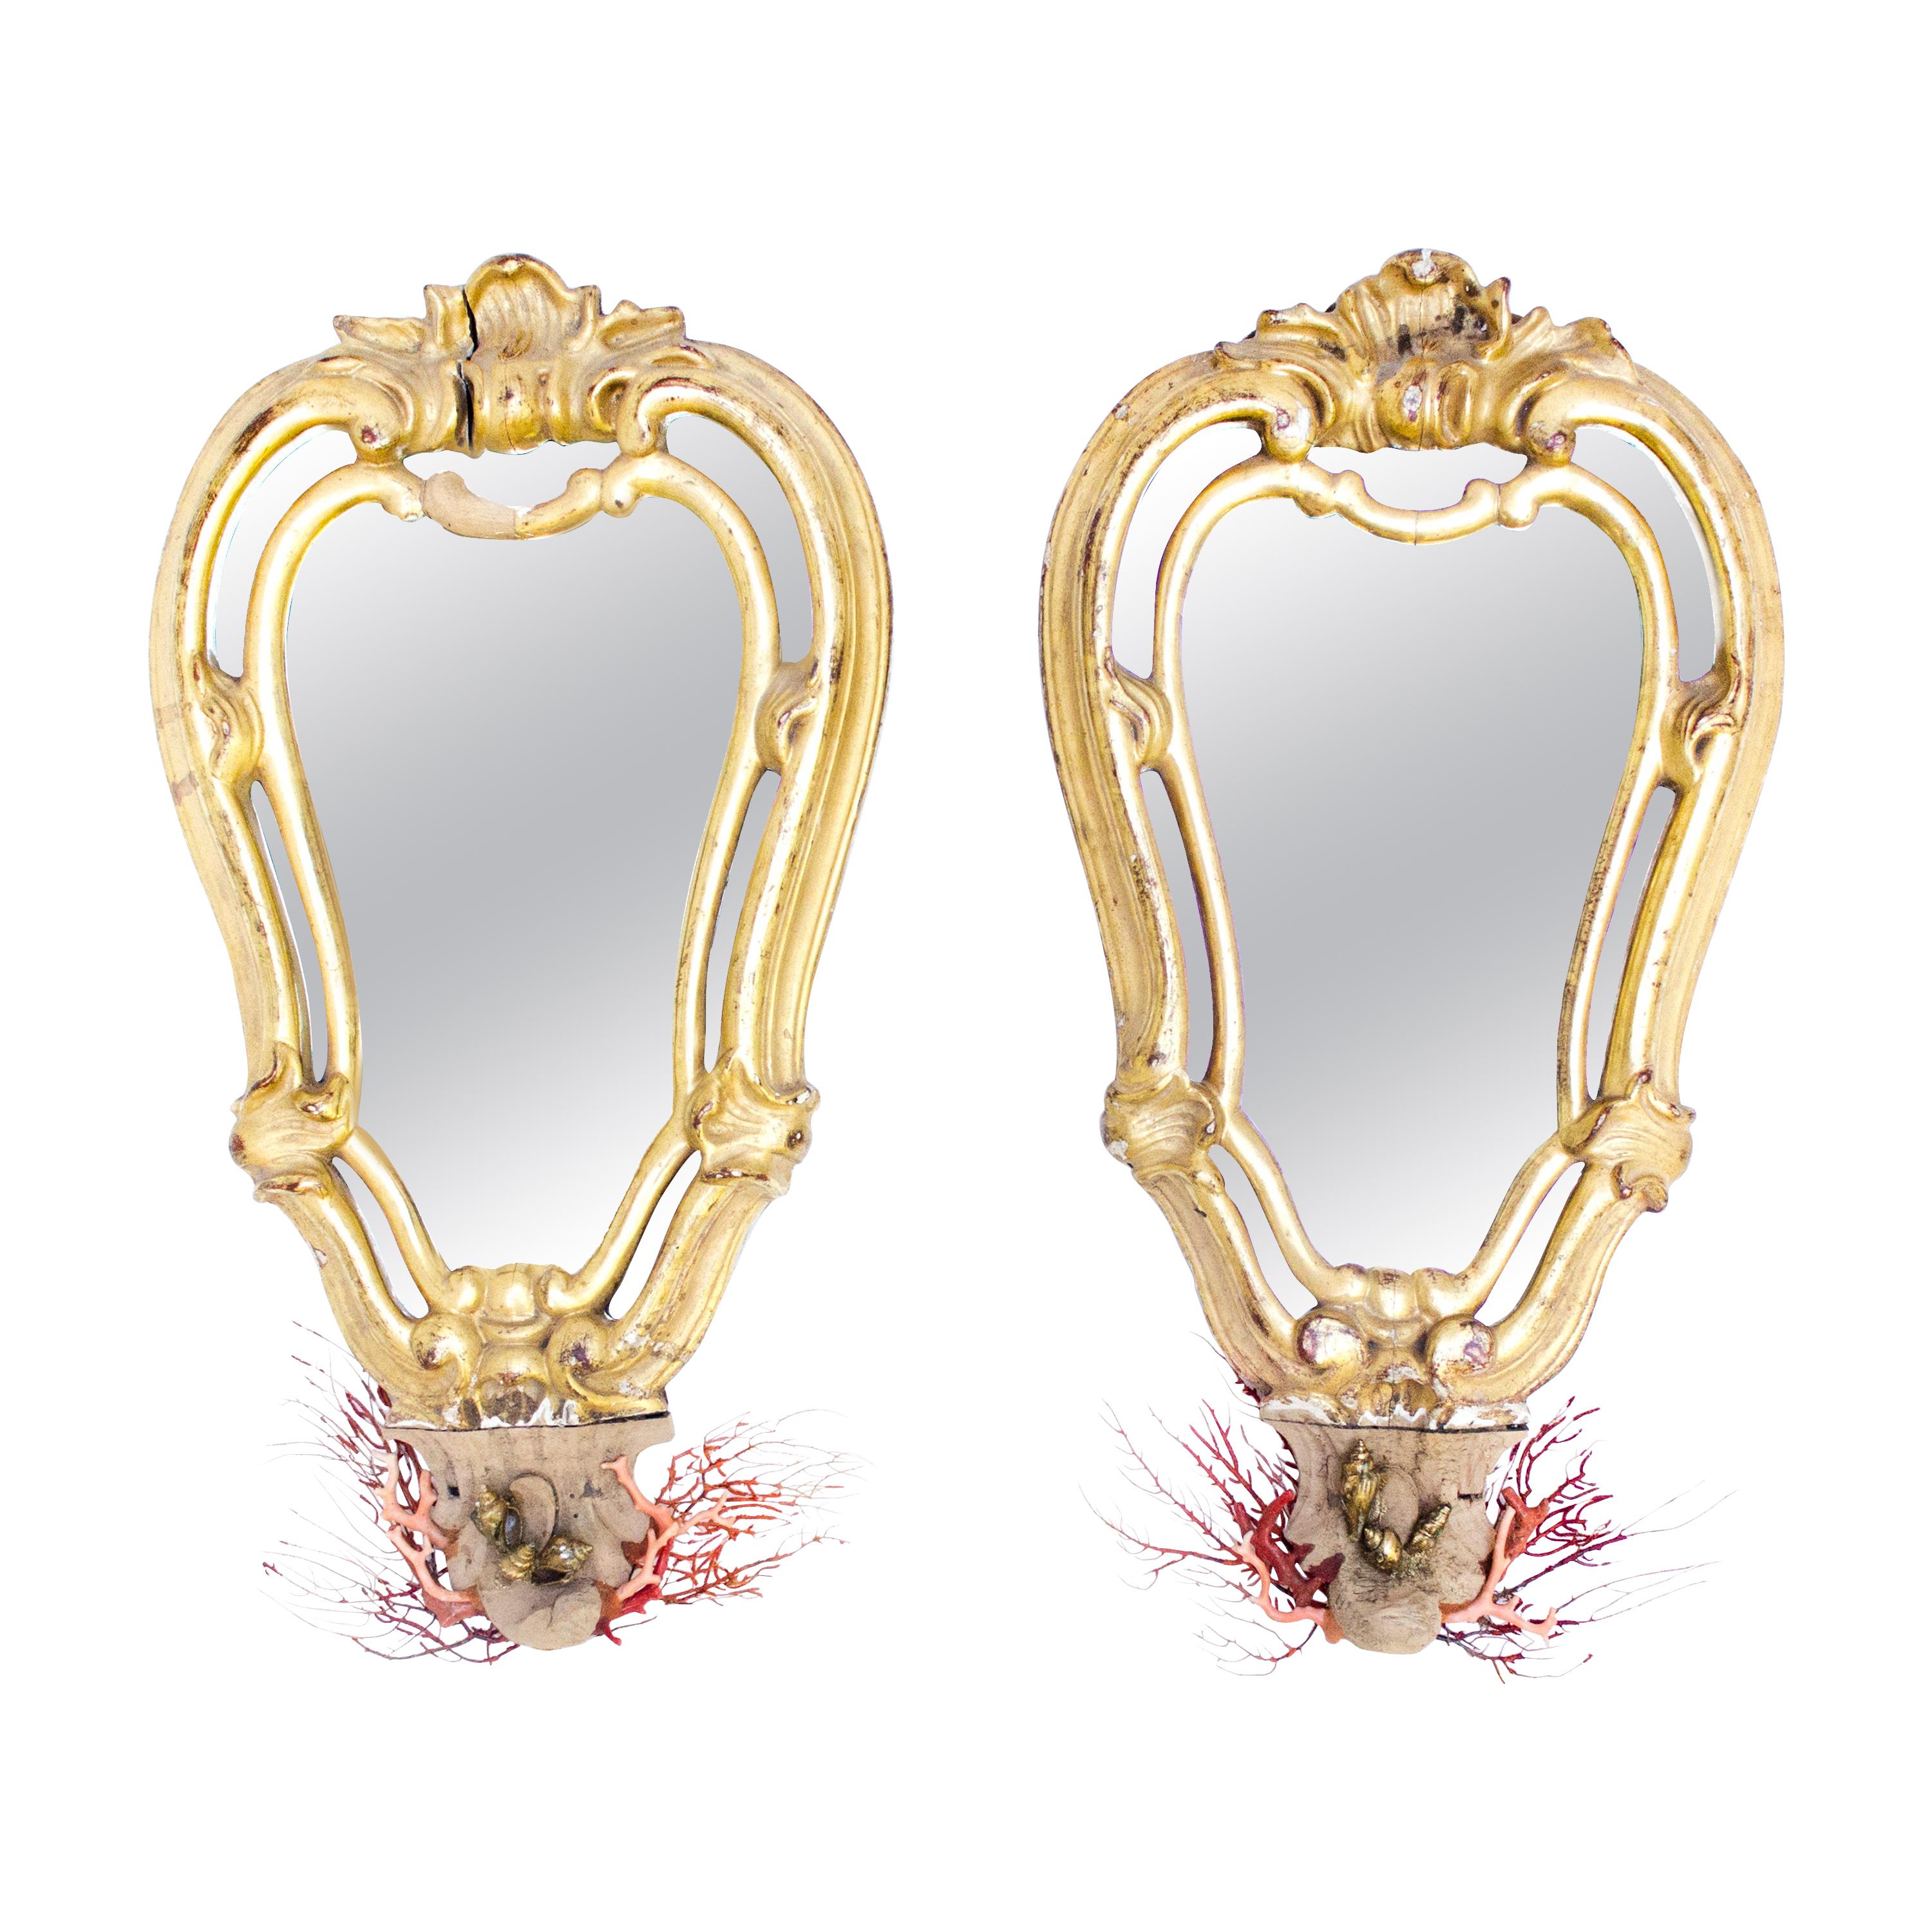 Pair of 18th Century Italian Mirrors Decorated with Mediterranean Coral